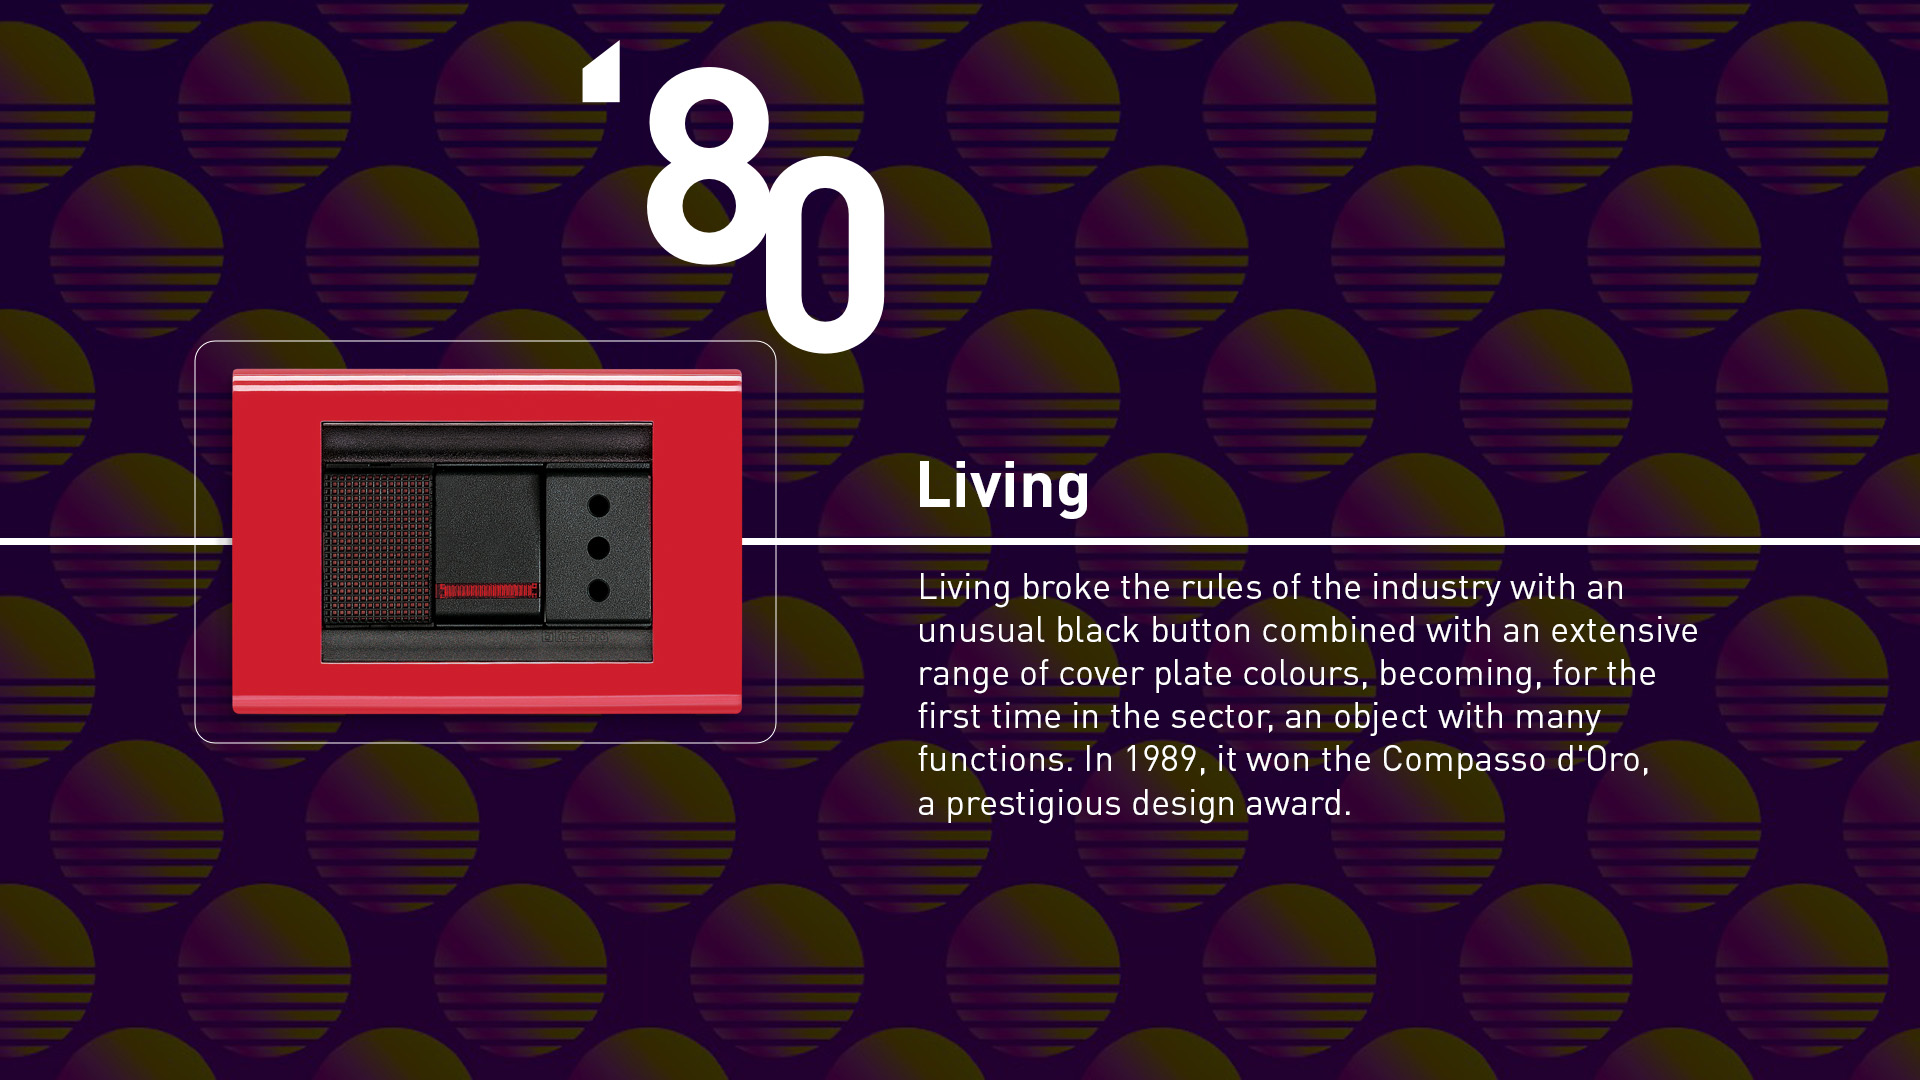 Living (1980). The range that broke the rules with an unusual black button combined with an extensive range of cover plate colours (like the red portrayed) and many functions.